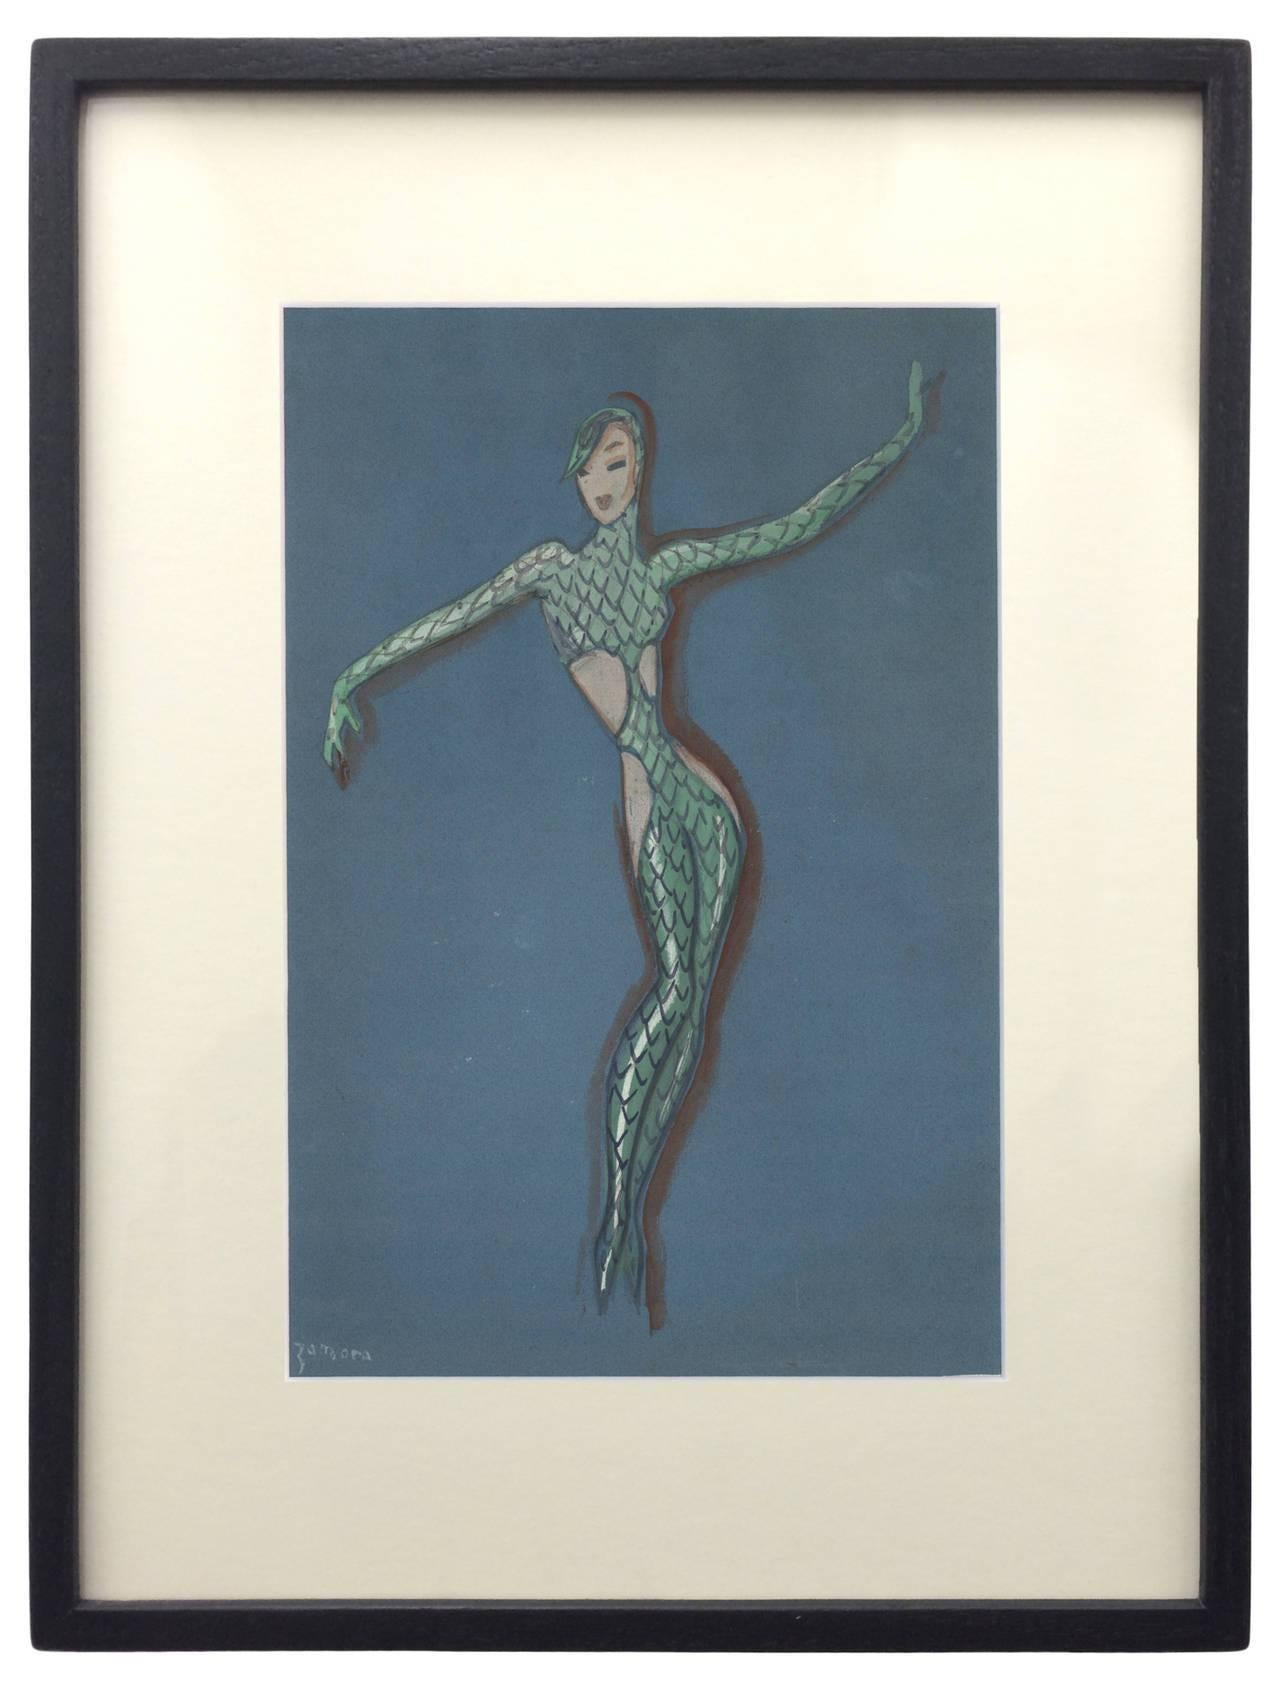 Original gouache on heavy blue paper. Framed in an artisanally-crafted, Chinese-ink-stained frame with an archival mat and OP3 acrylic. José de Zamora (1890-1971) was a Spanish writer, designer and illustrator who lived in Paris and studied under